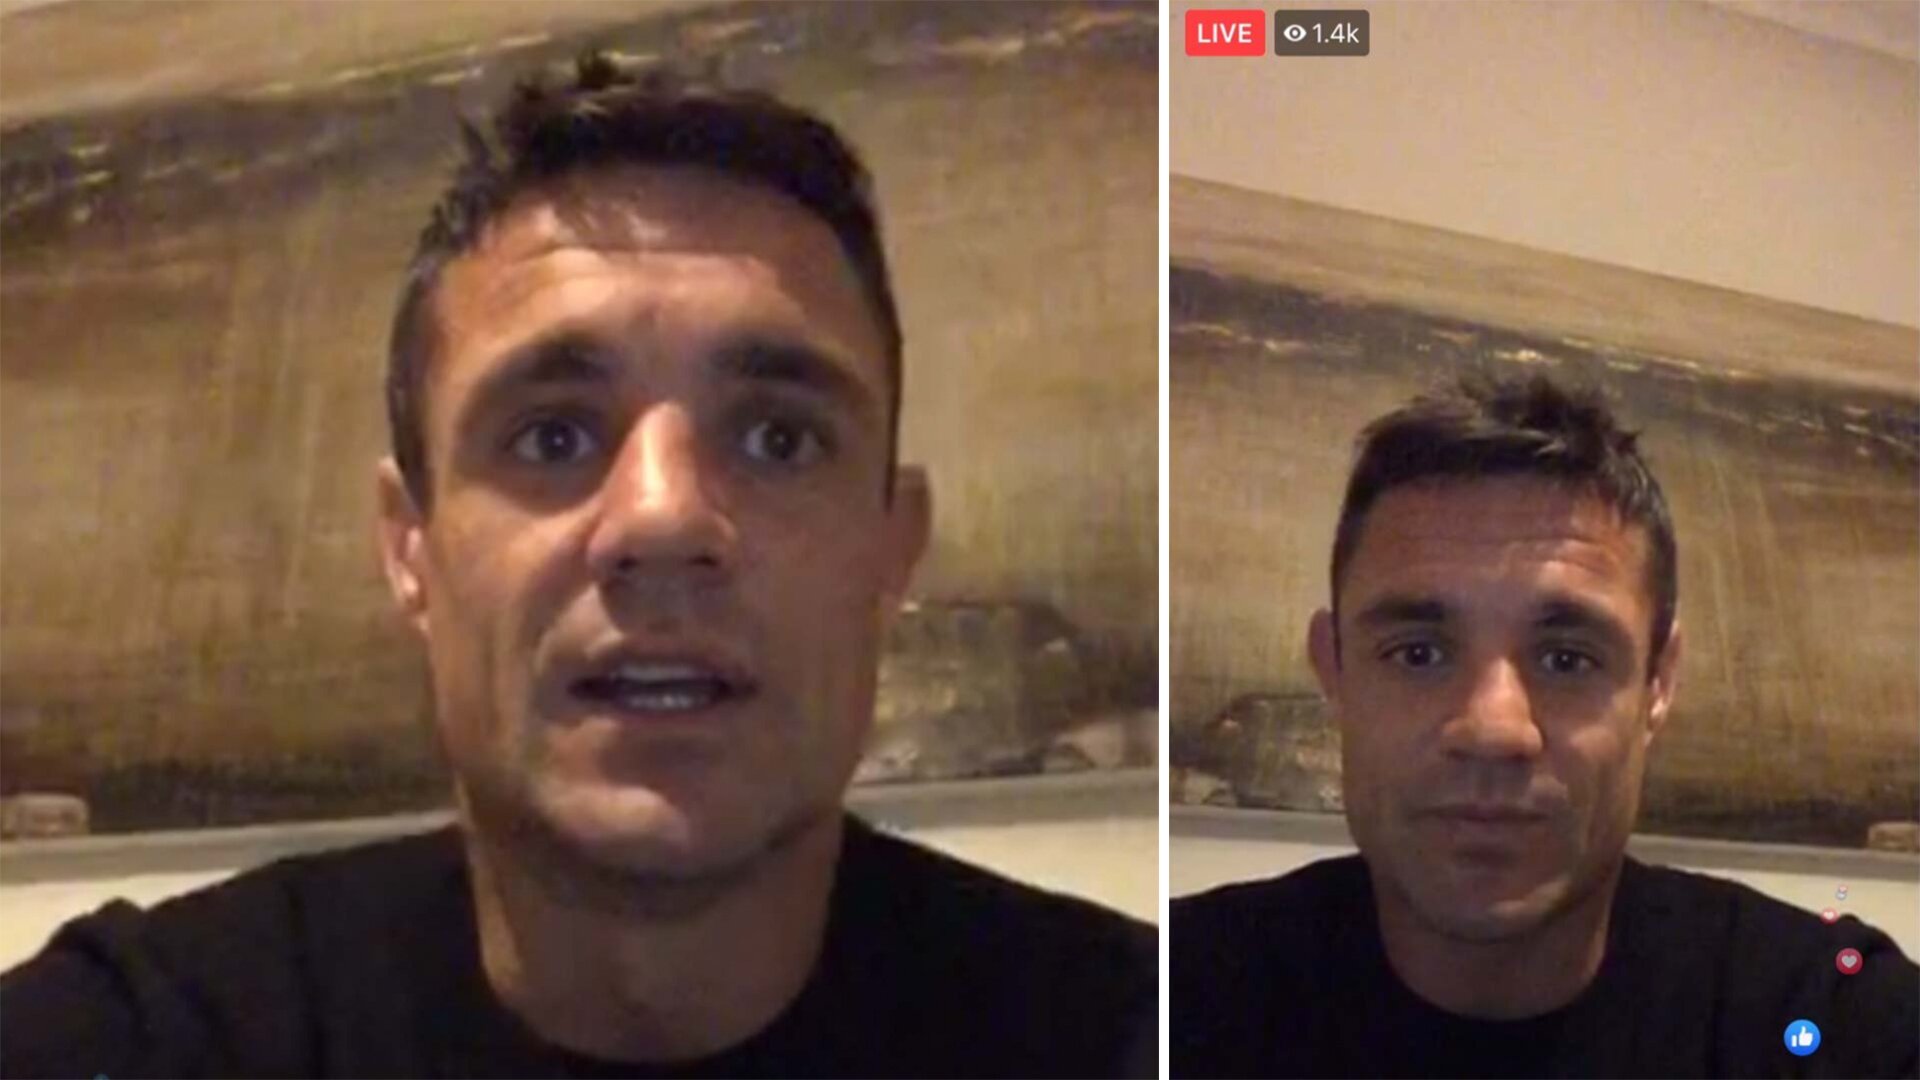 Dan Carter Q&A video fail as hundreds of trolls enter chat in uncomfortable livestream